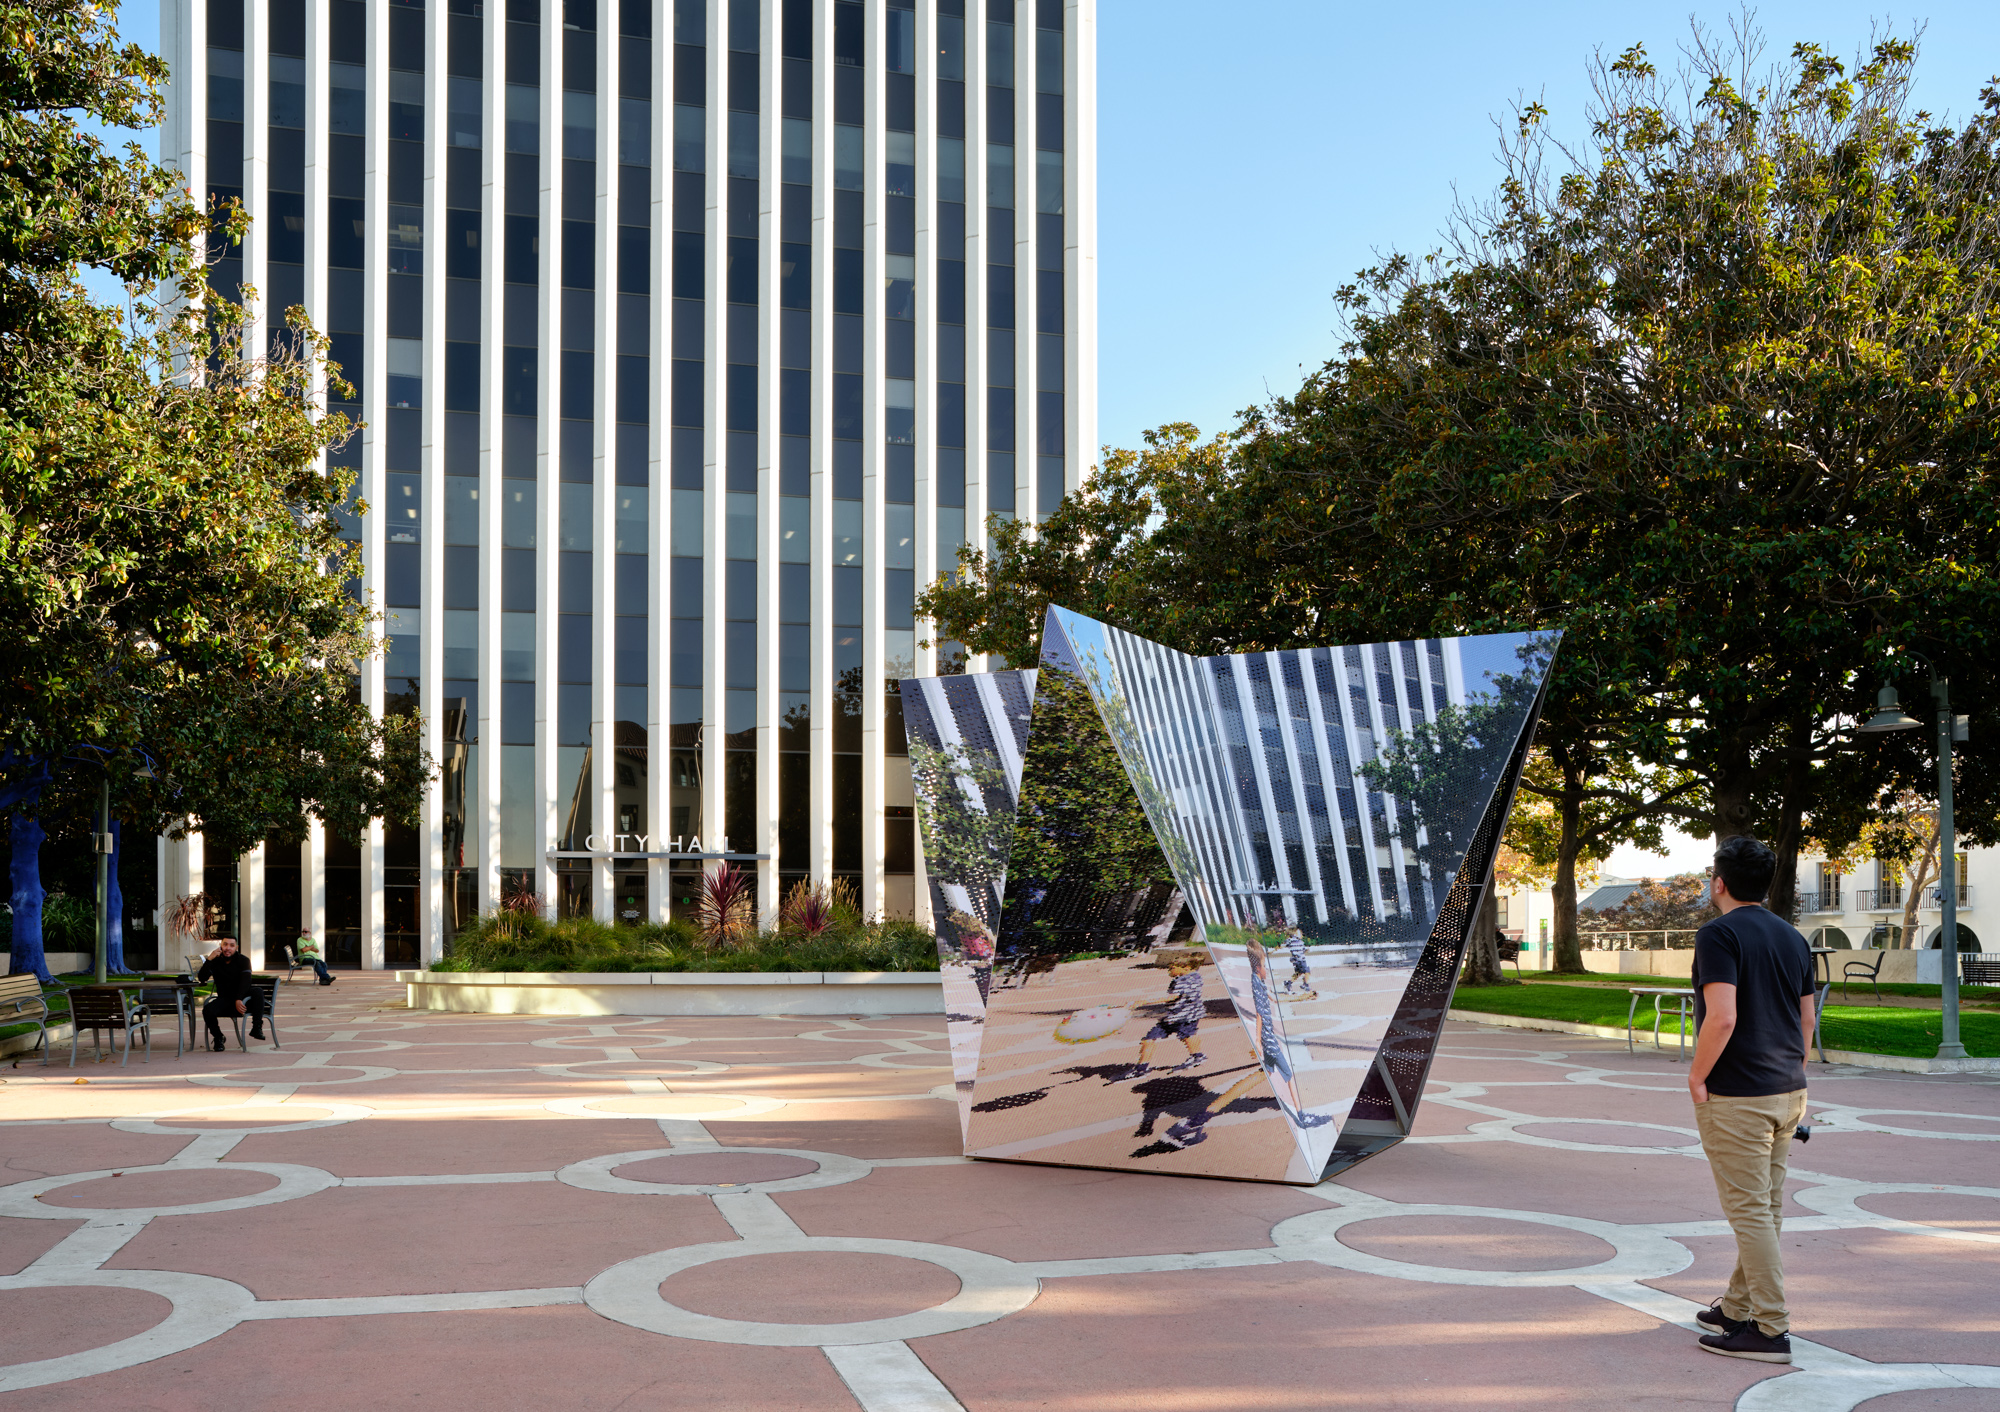 A man walking by a mirrored crystal structure in Palo Alto